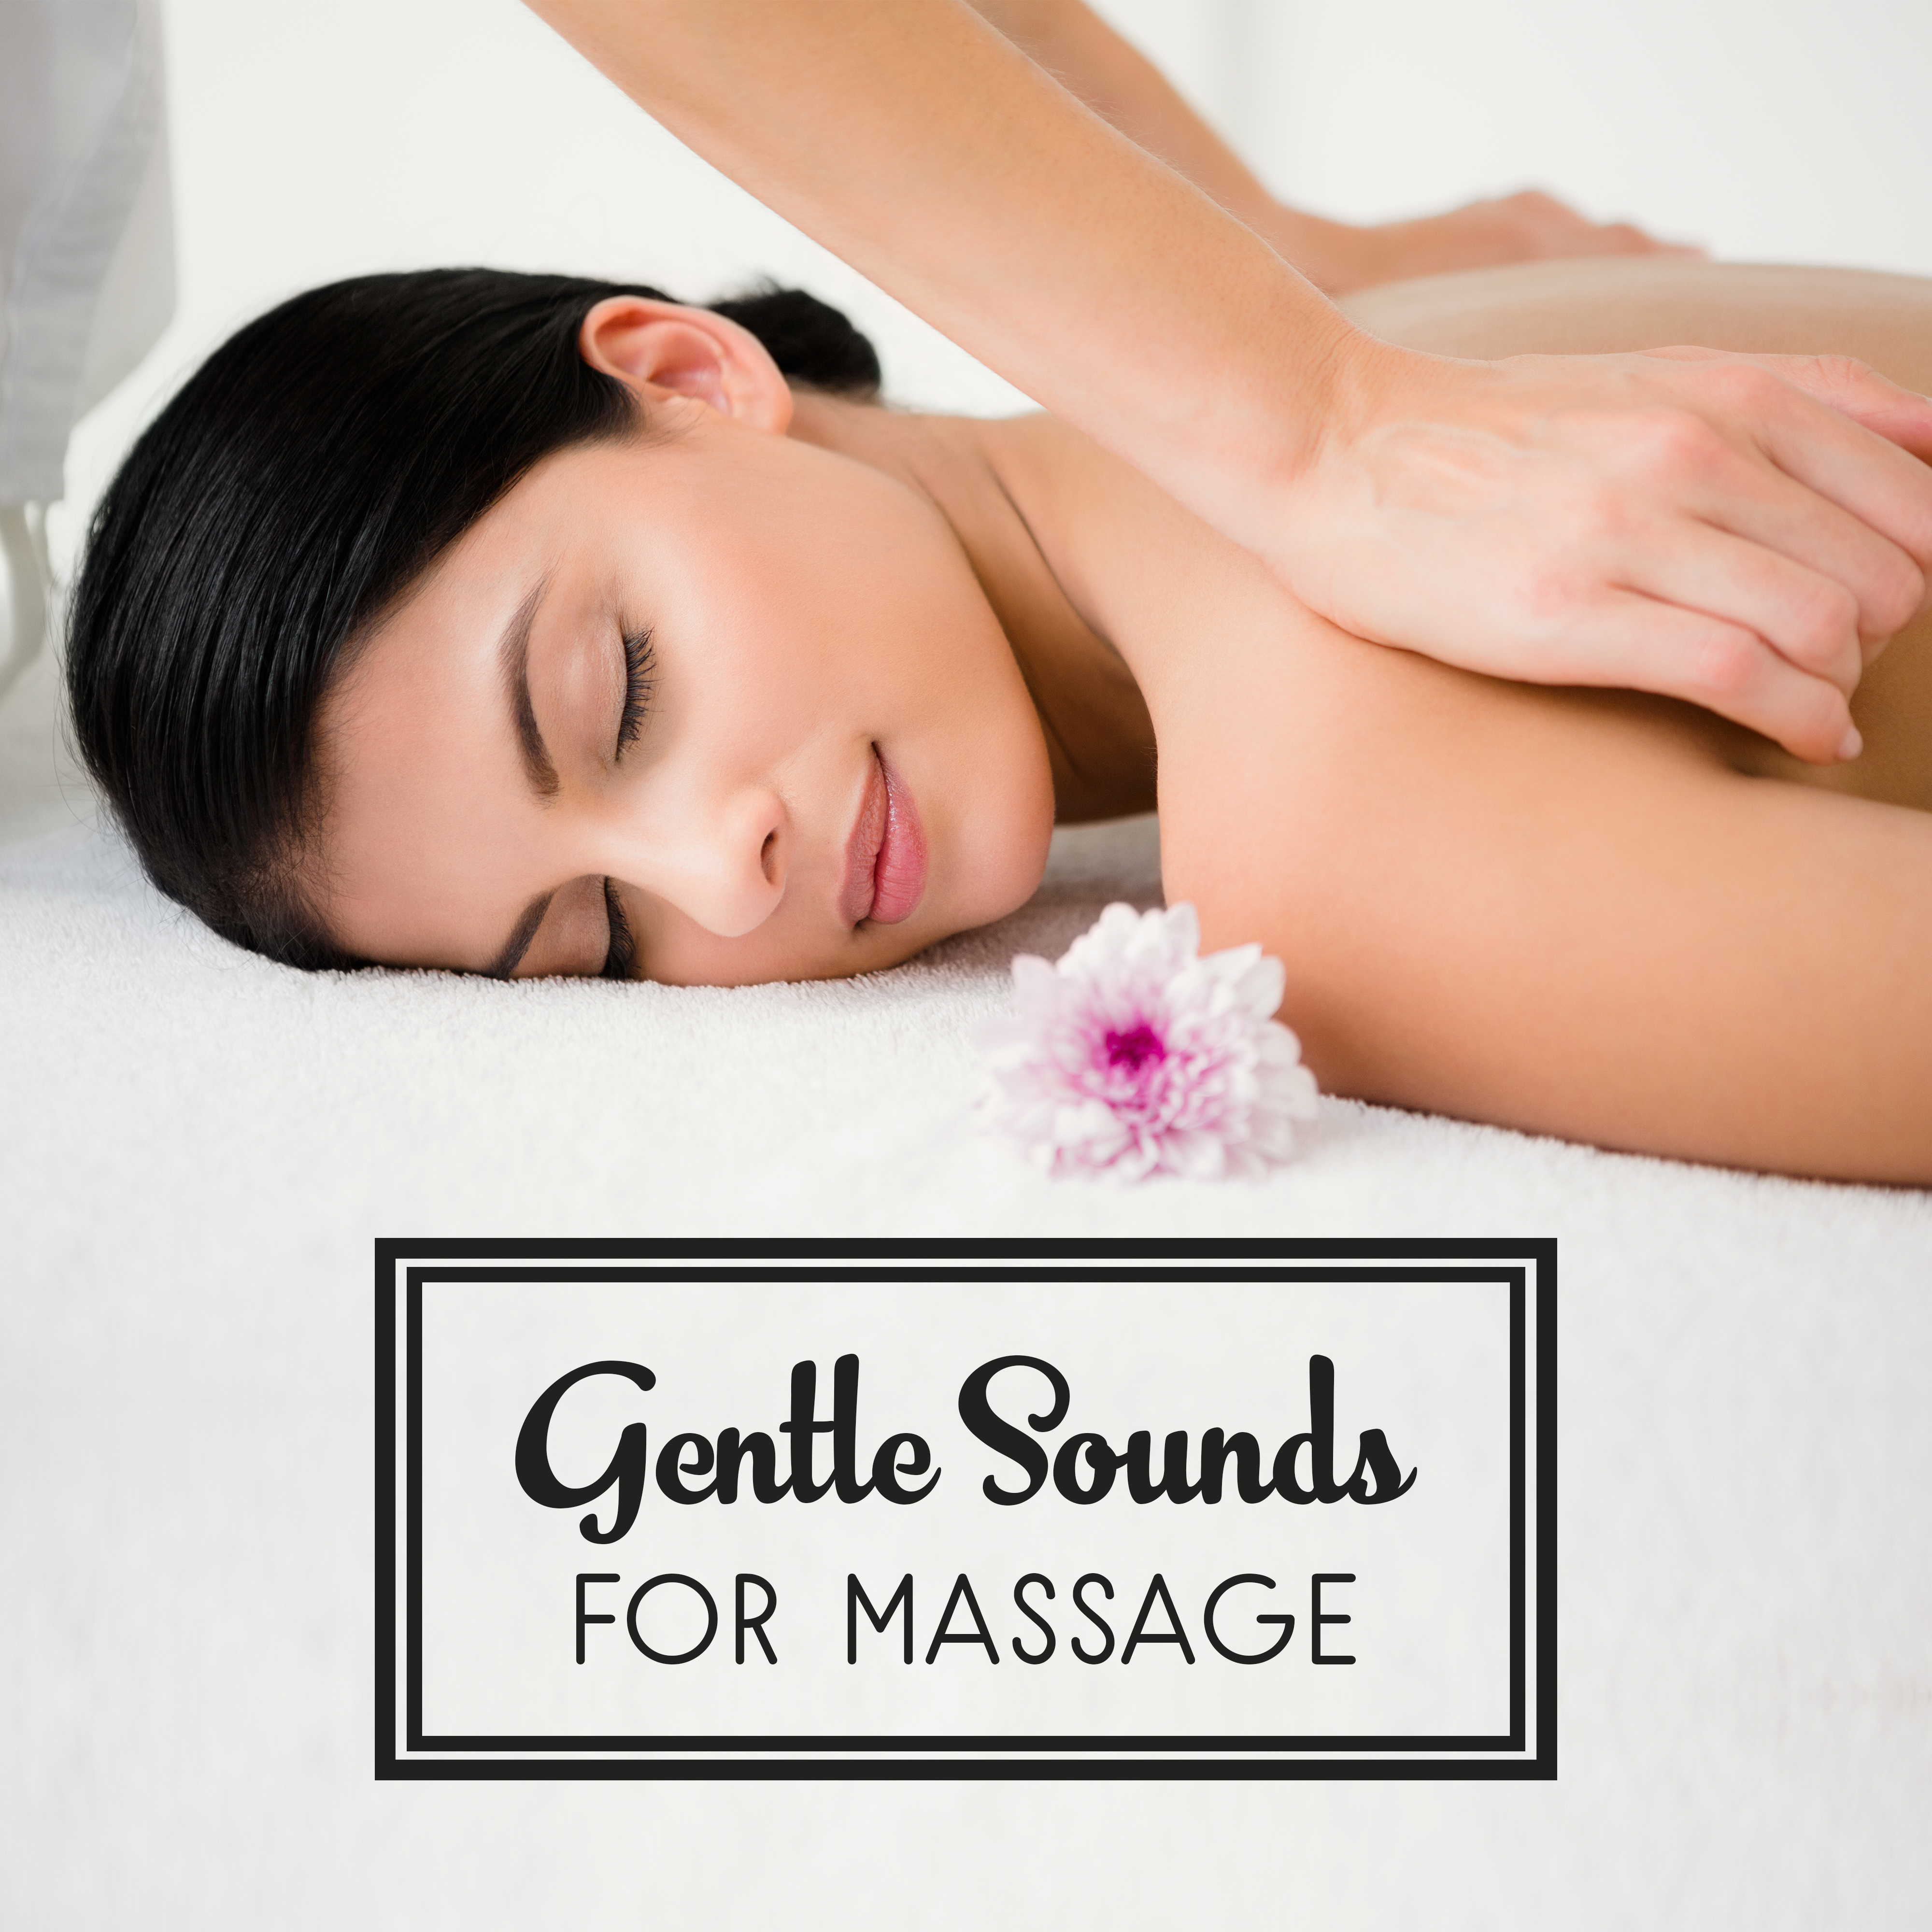 Gentle Sounds for Massage